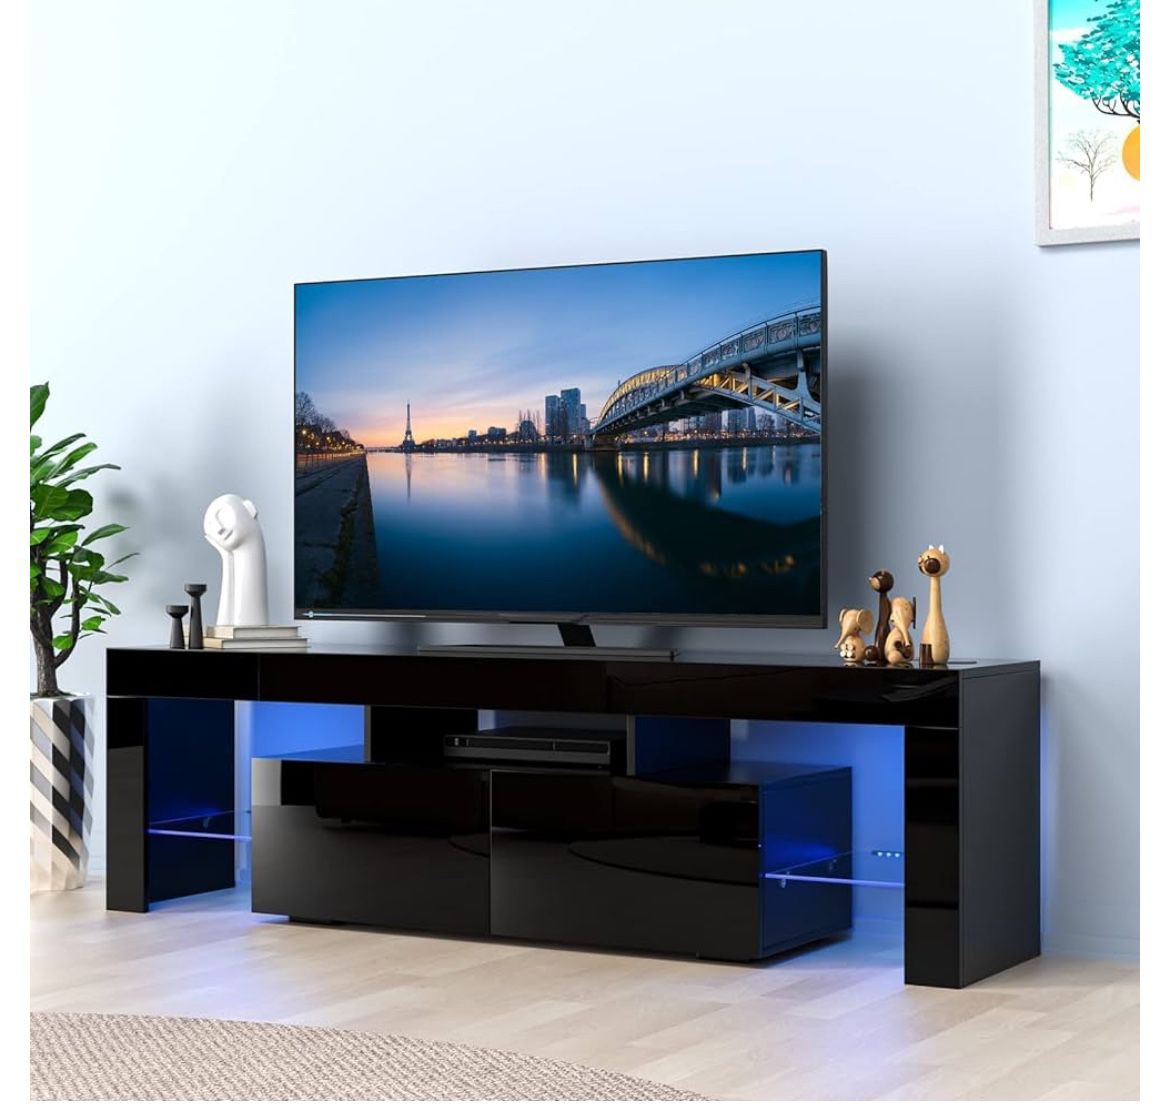 Led Tv Stand With Storage Shelves